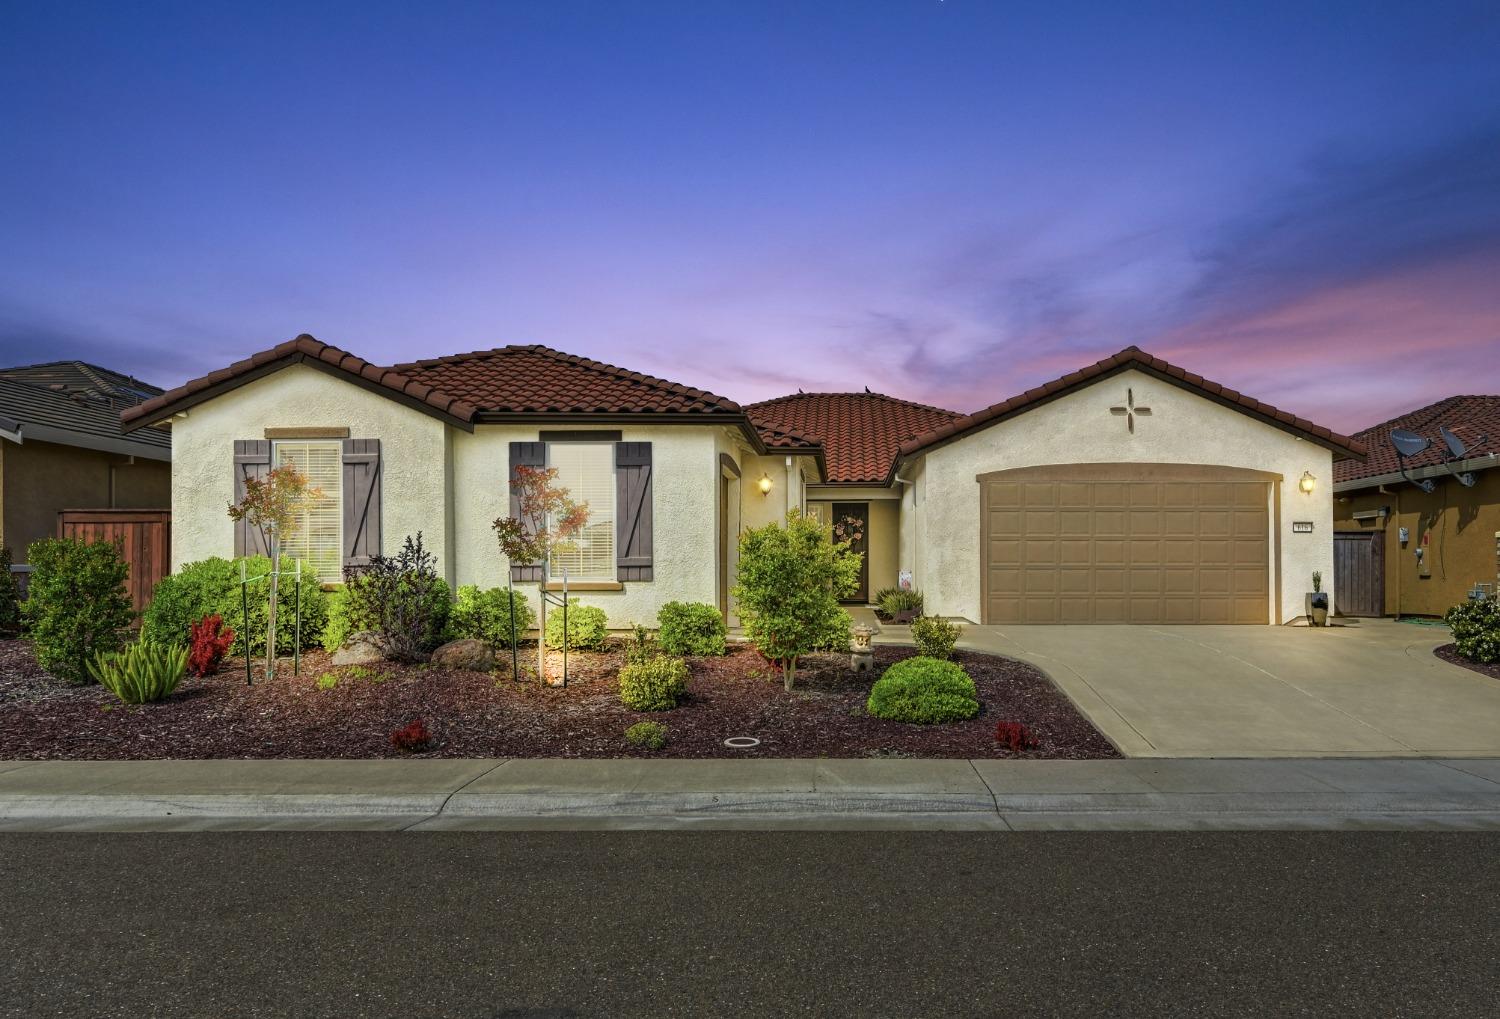 Photo of 616 Crosby Ct in Roseville, CA